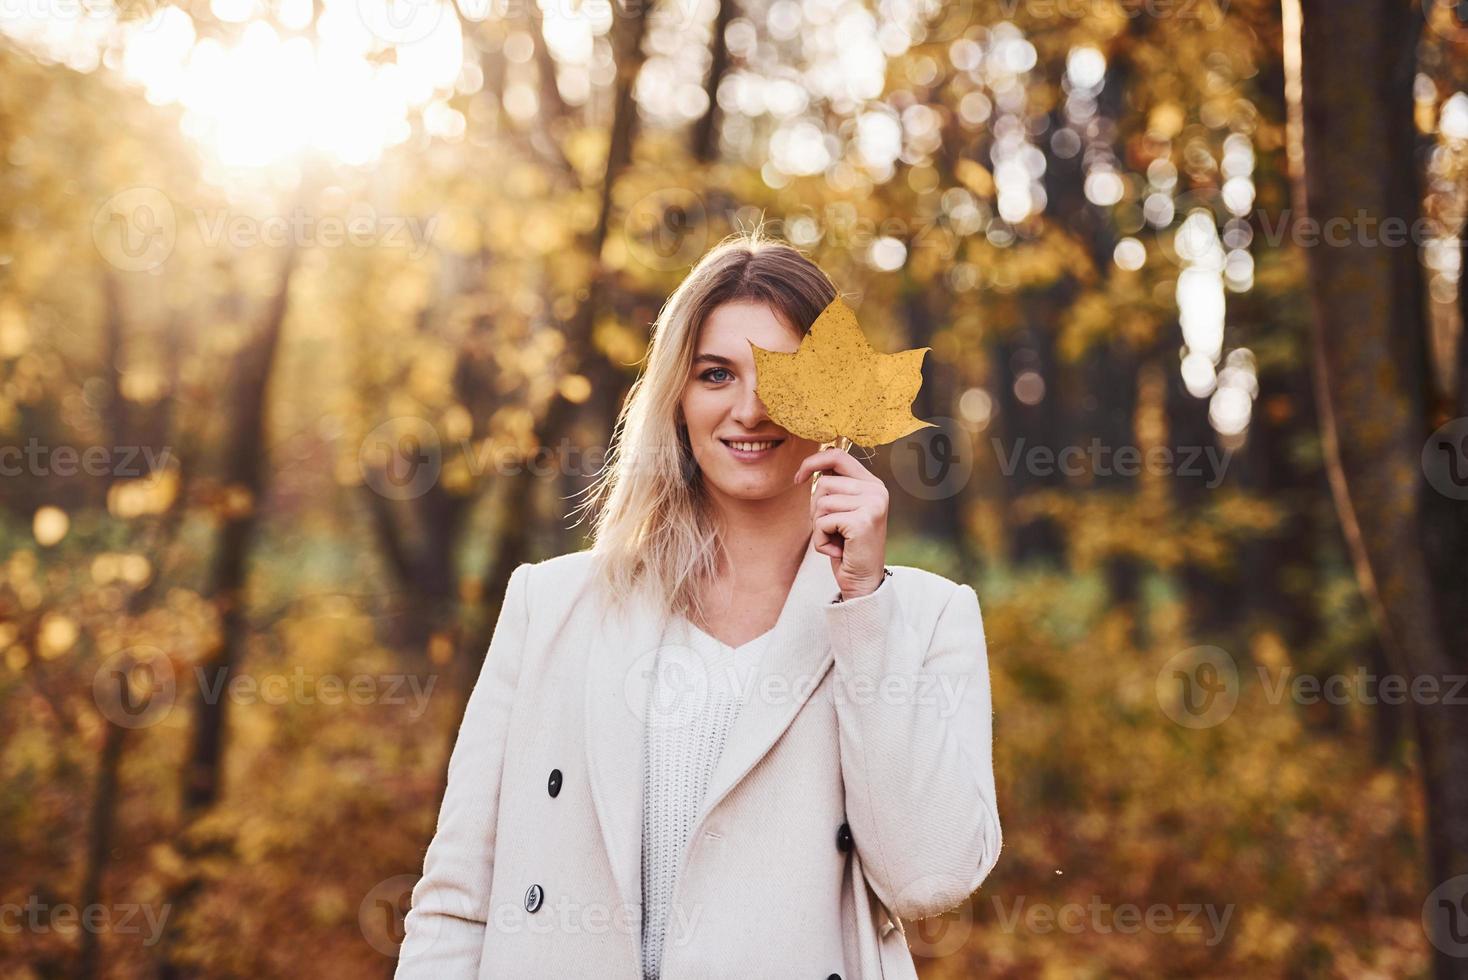 Portrait of young brunette with leaf that is in autumn forest at daytime photo